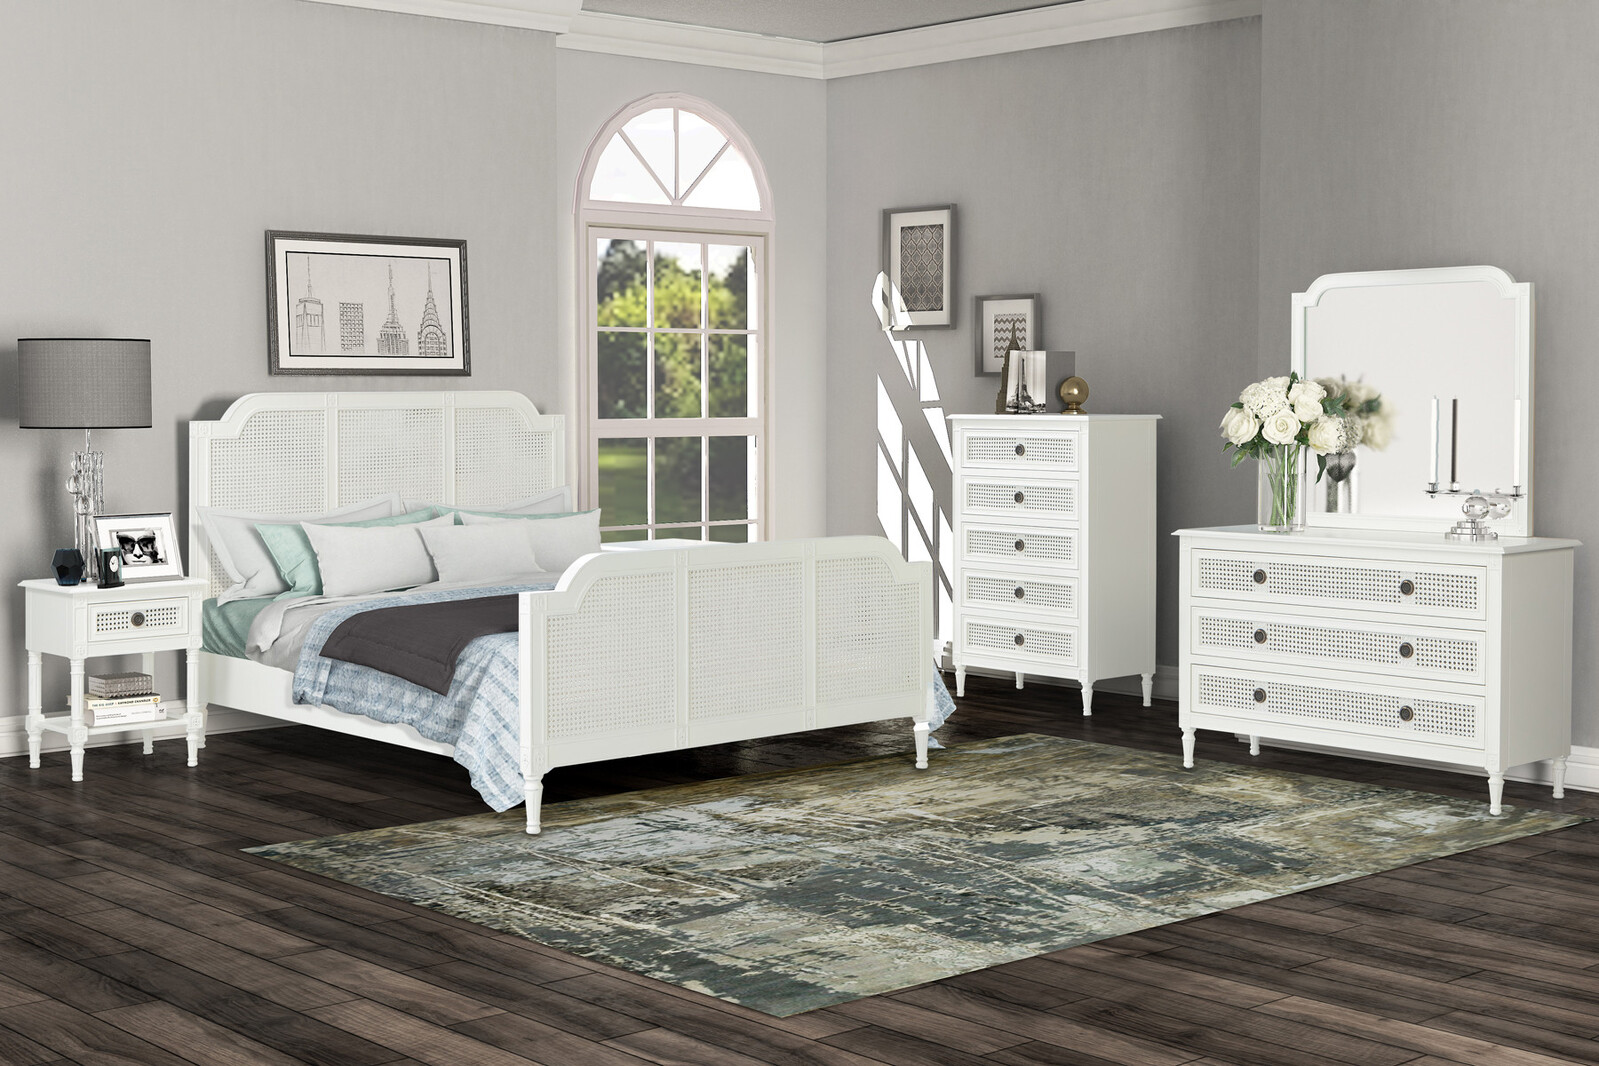 Paloma Queen Bed Frame French Style White